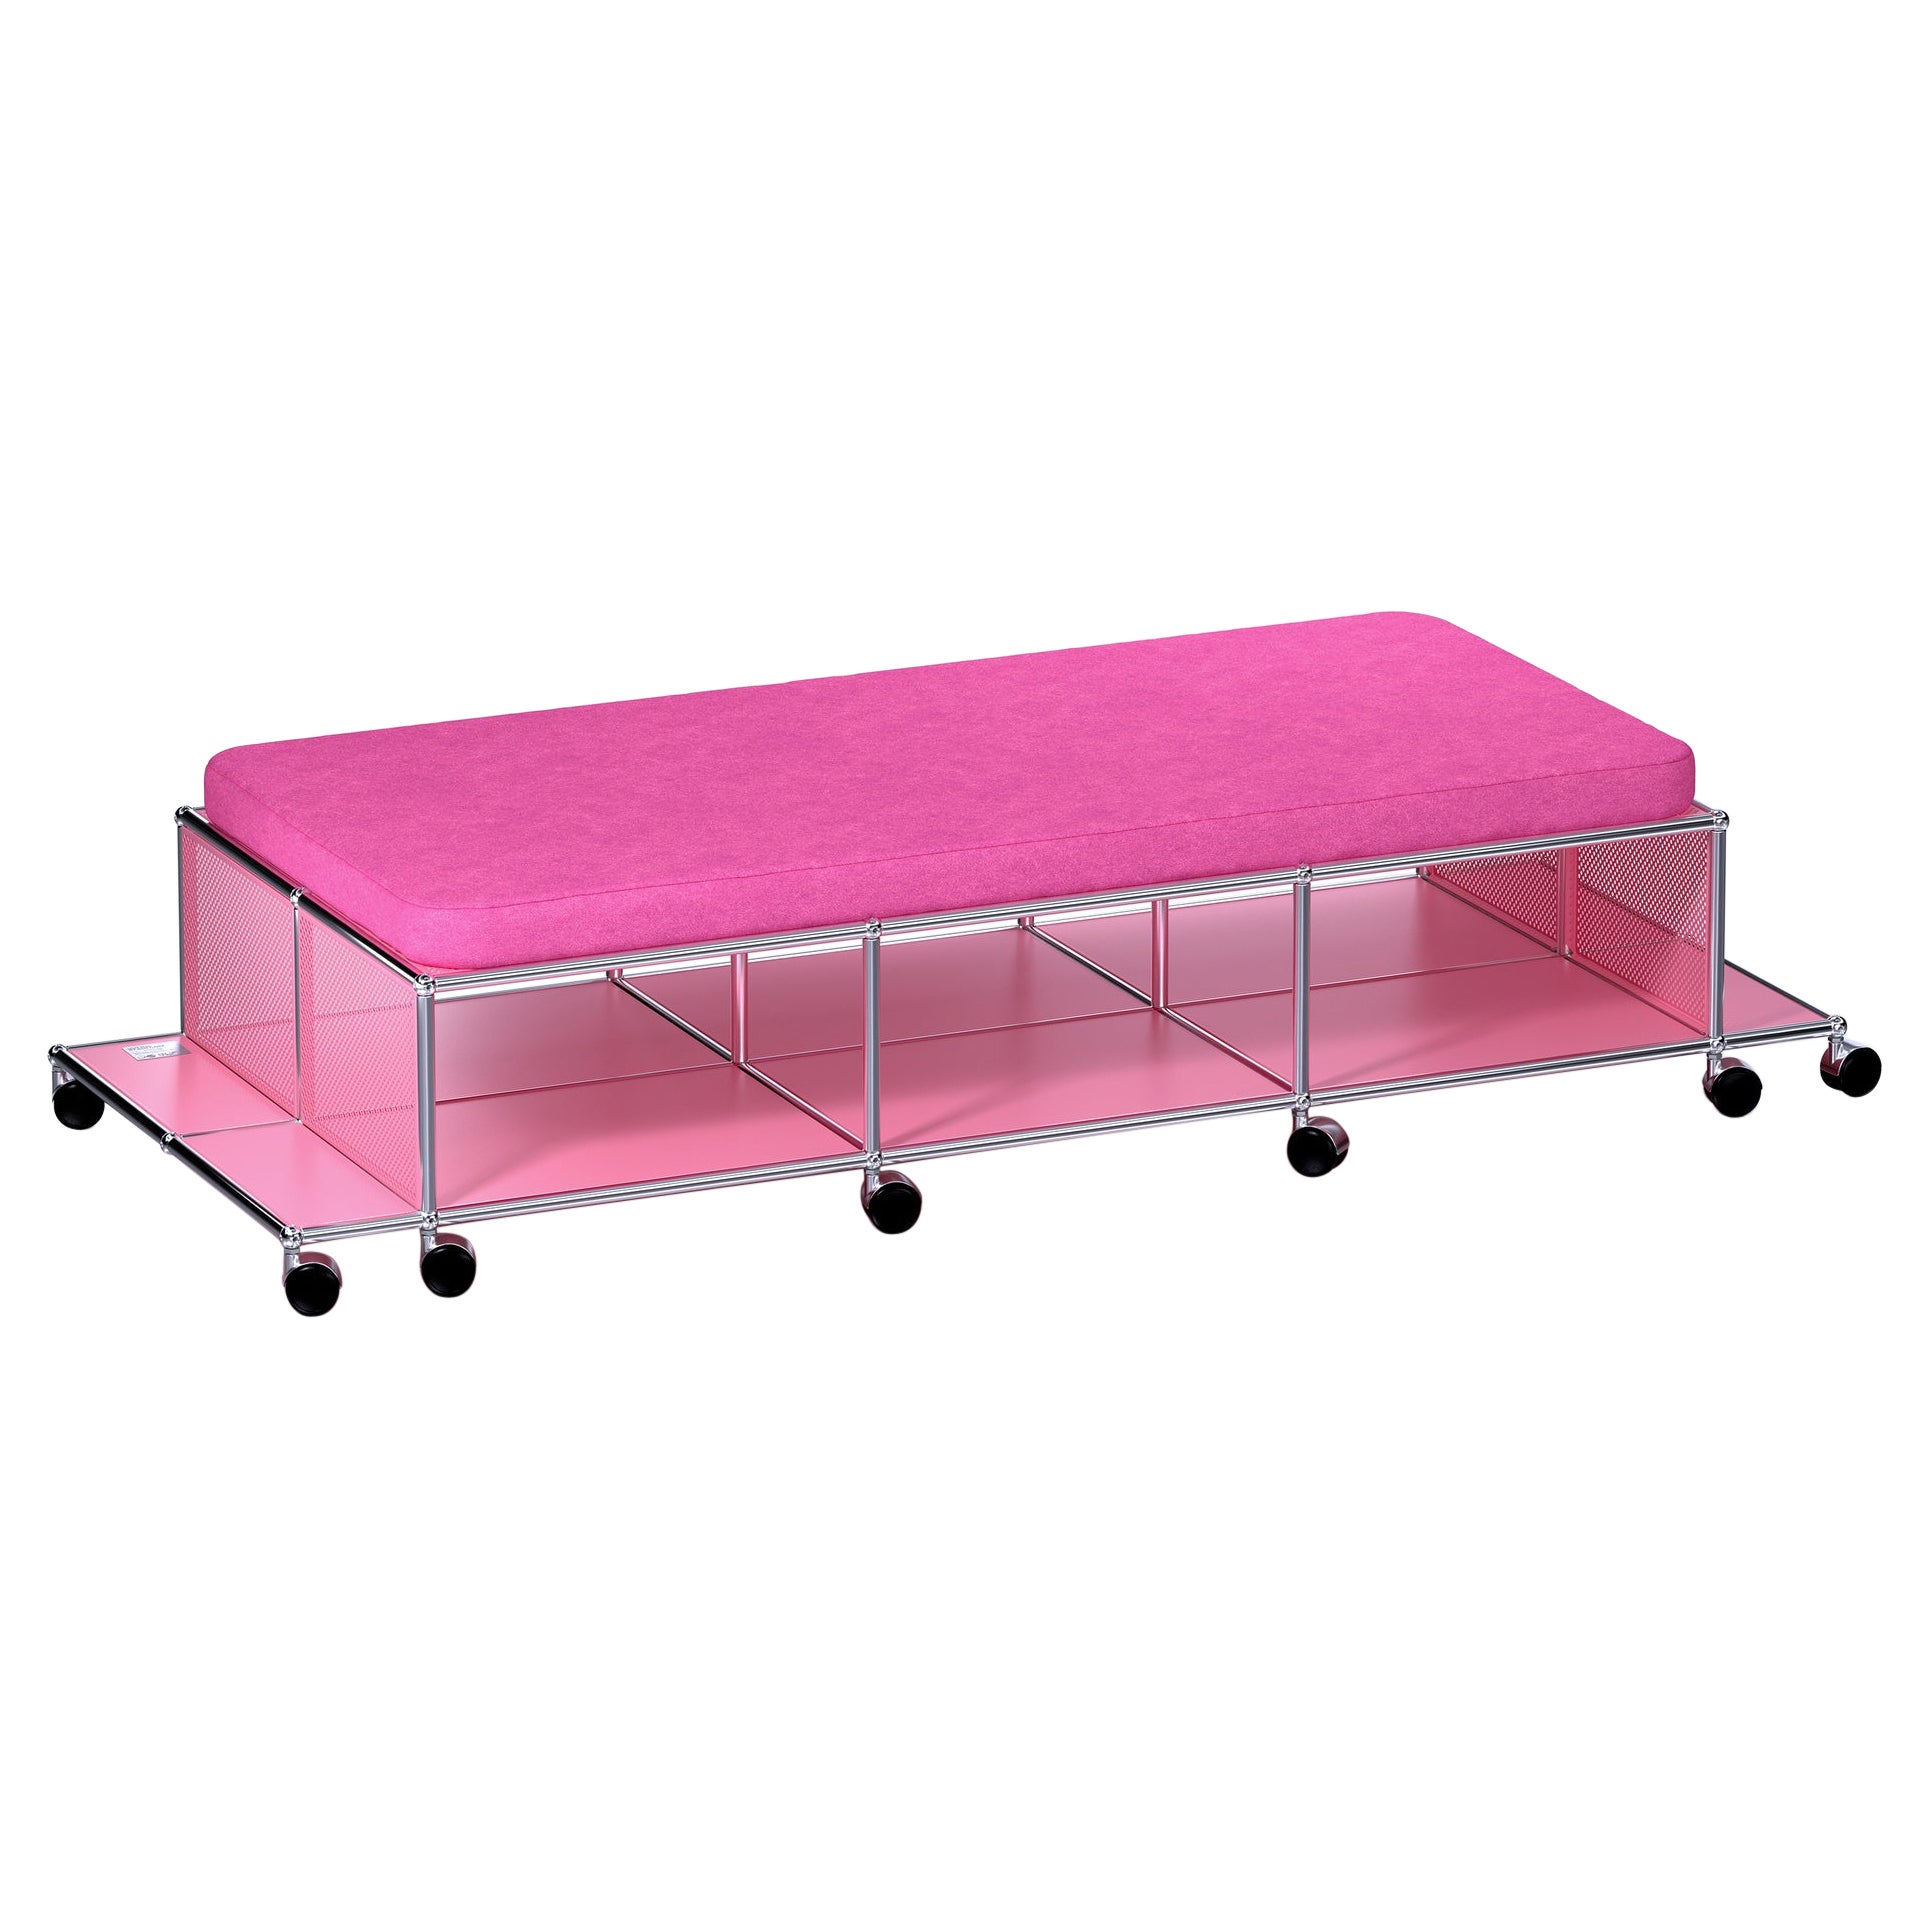 Limited Edition NEW USM Downtown Pink Central Lounge by Ben Ganz in STOCK